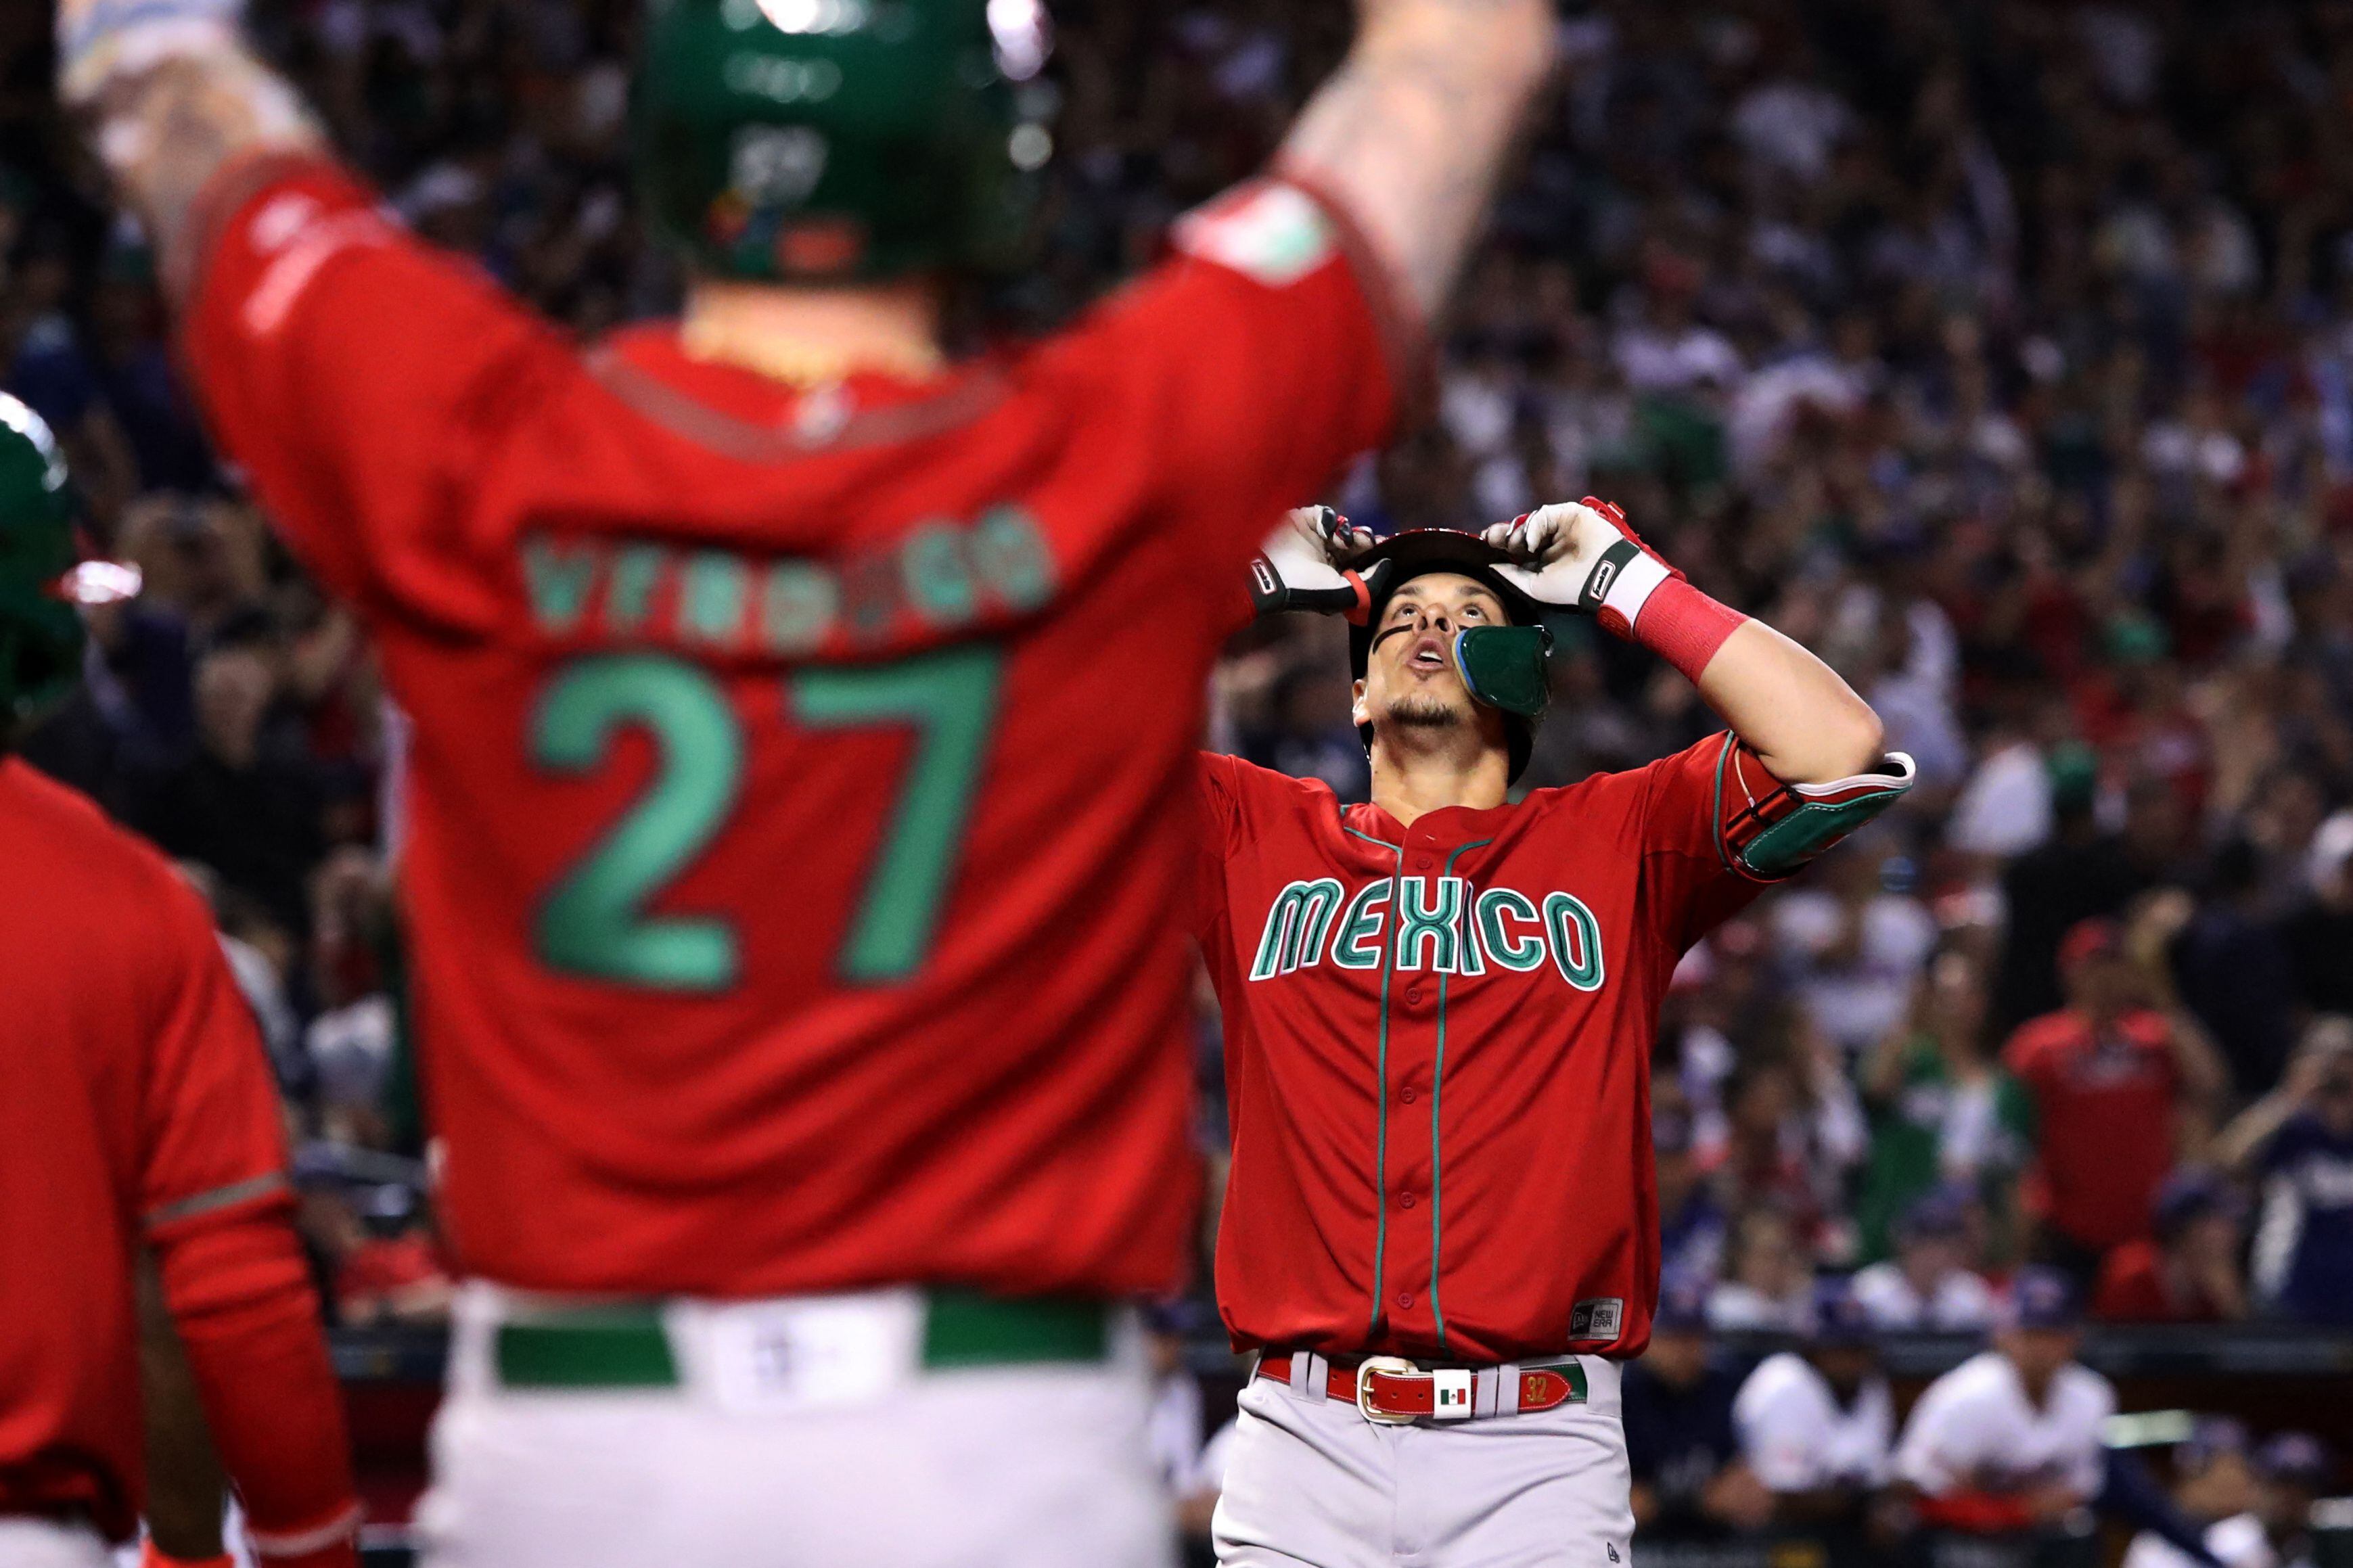 Mar 12, 2023; Phoenix, Arizona, USA; Team Mexico infielder Joey Meneses (32) celebrates a home run with Team Mexico outfielder Alex Verdugo (27) in the fourth inning against Team USA at Chase Field. Mandatory Credit: Zachary BonDurant-USA TODAY Sports